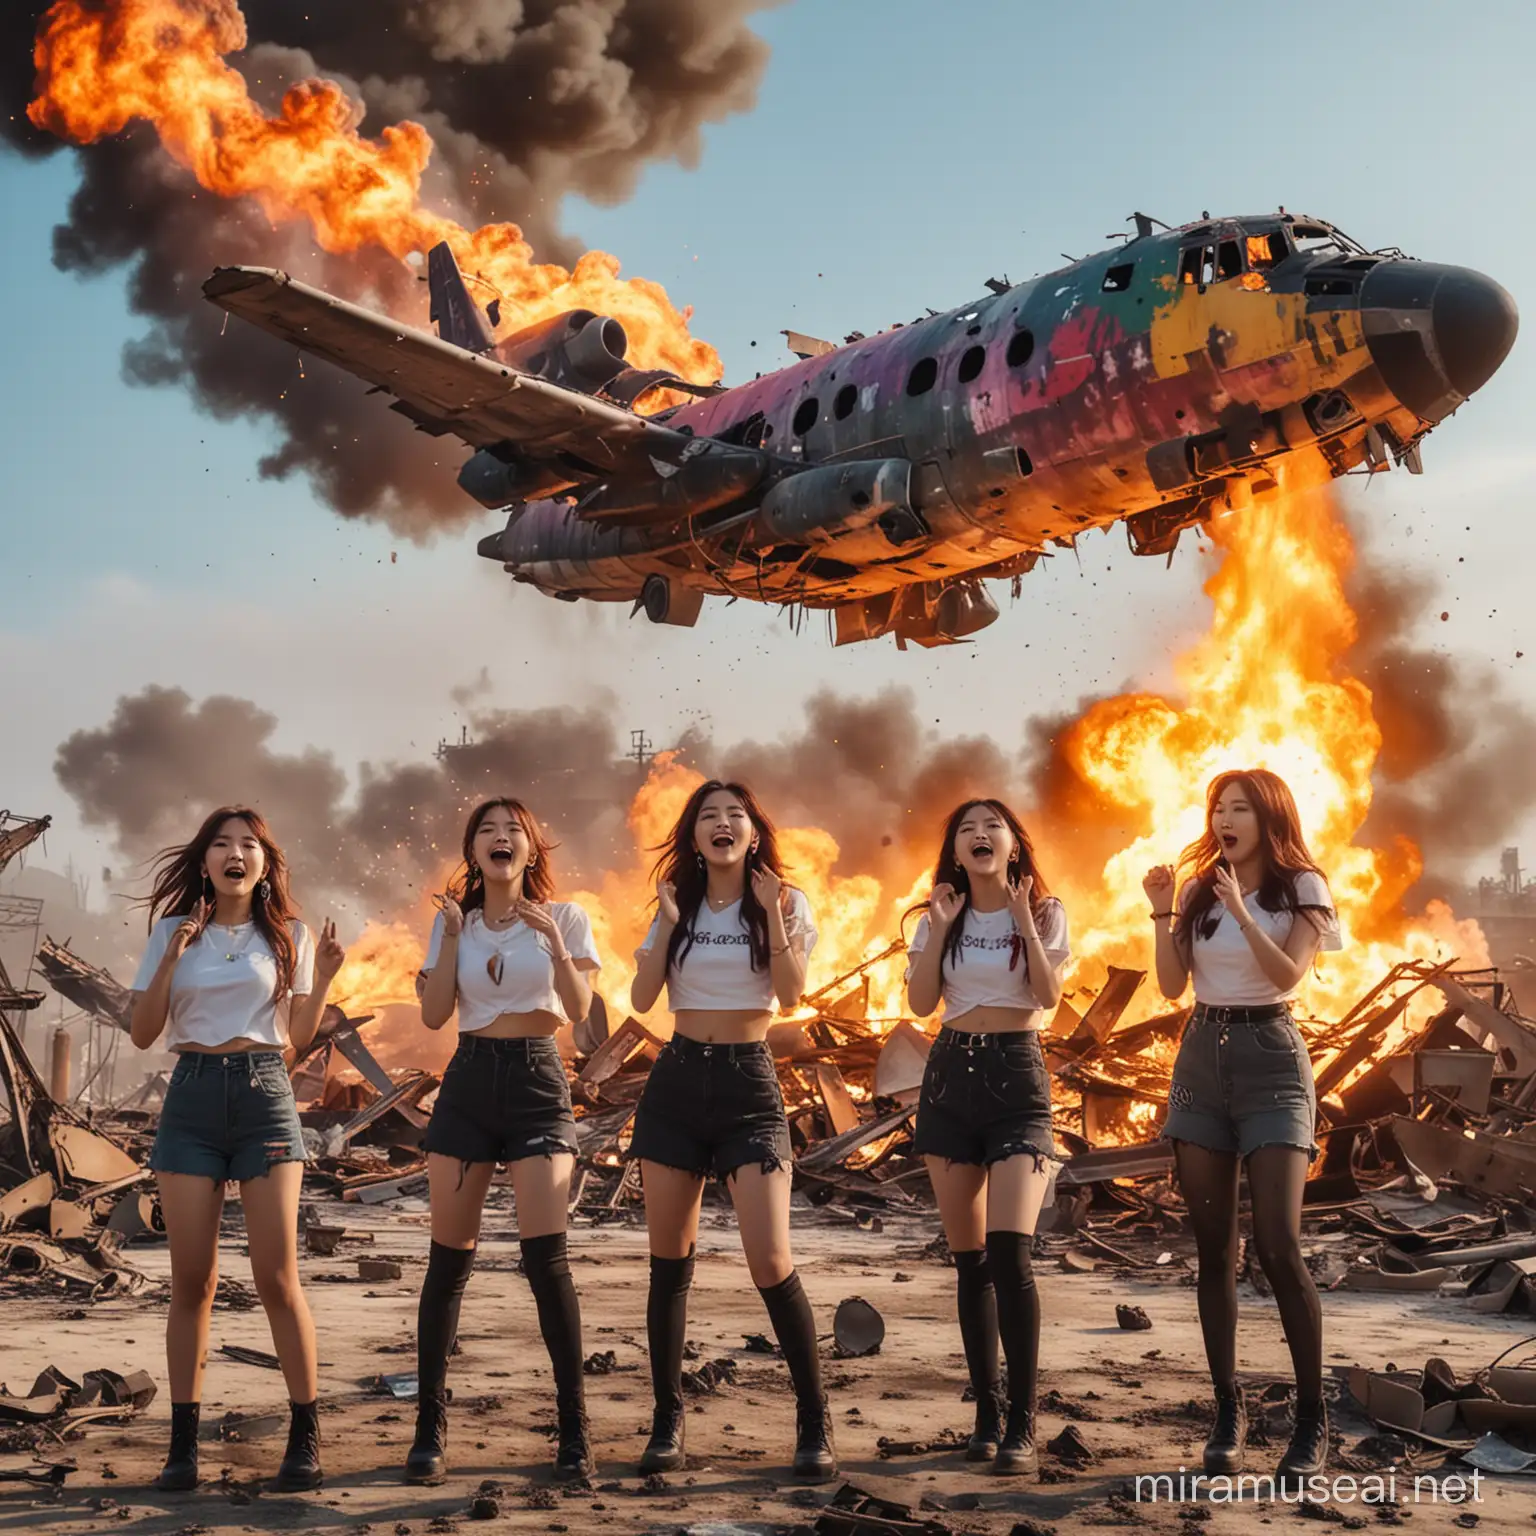 Kpop Group in Vibrant Outfits Celebrating Amidst WarTorn Ruins